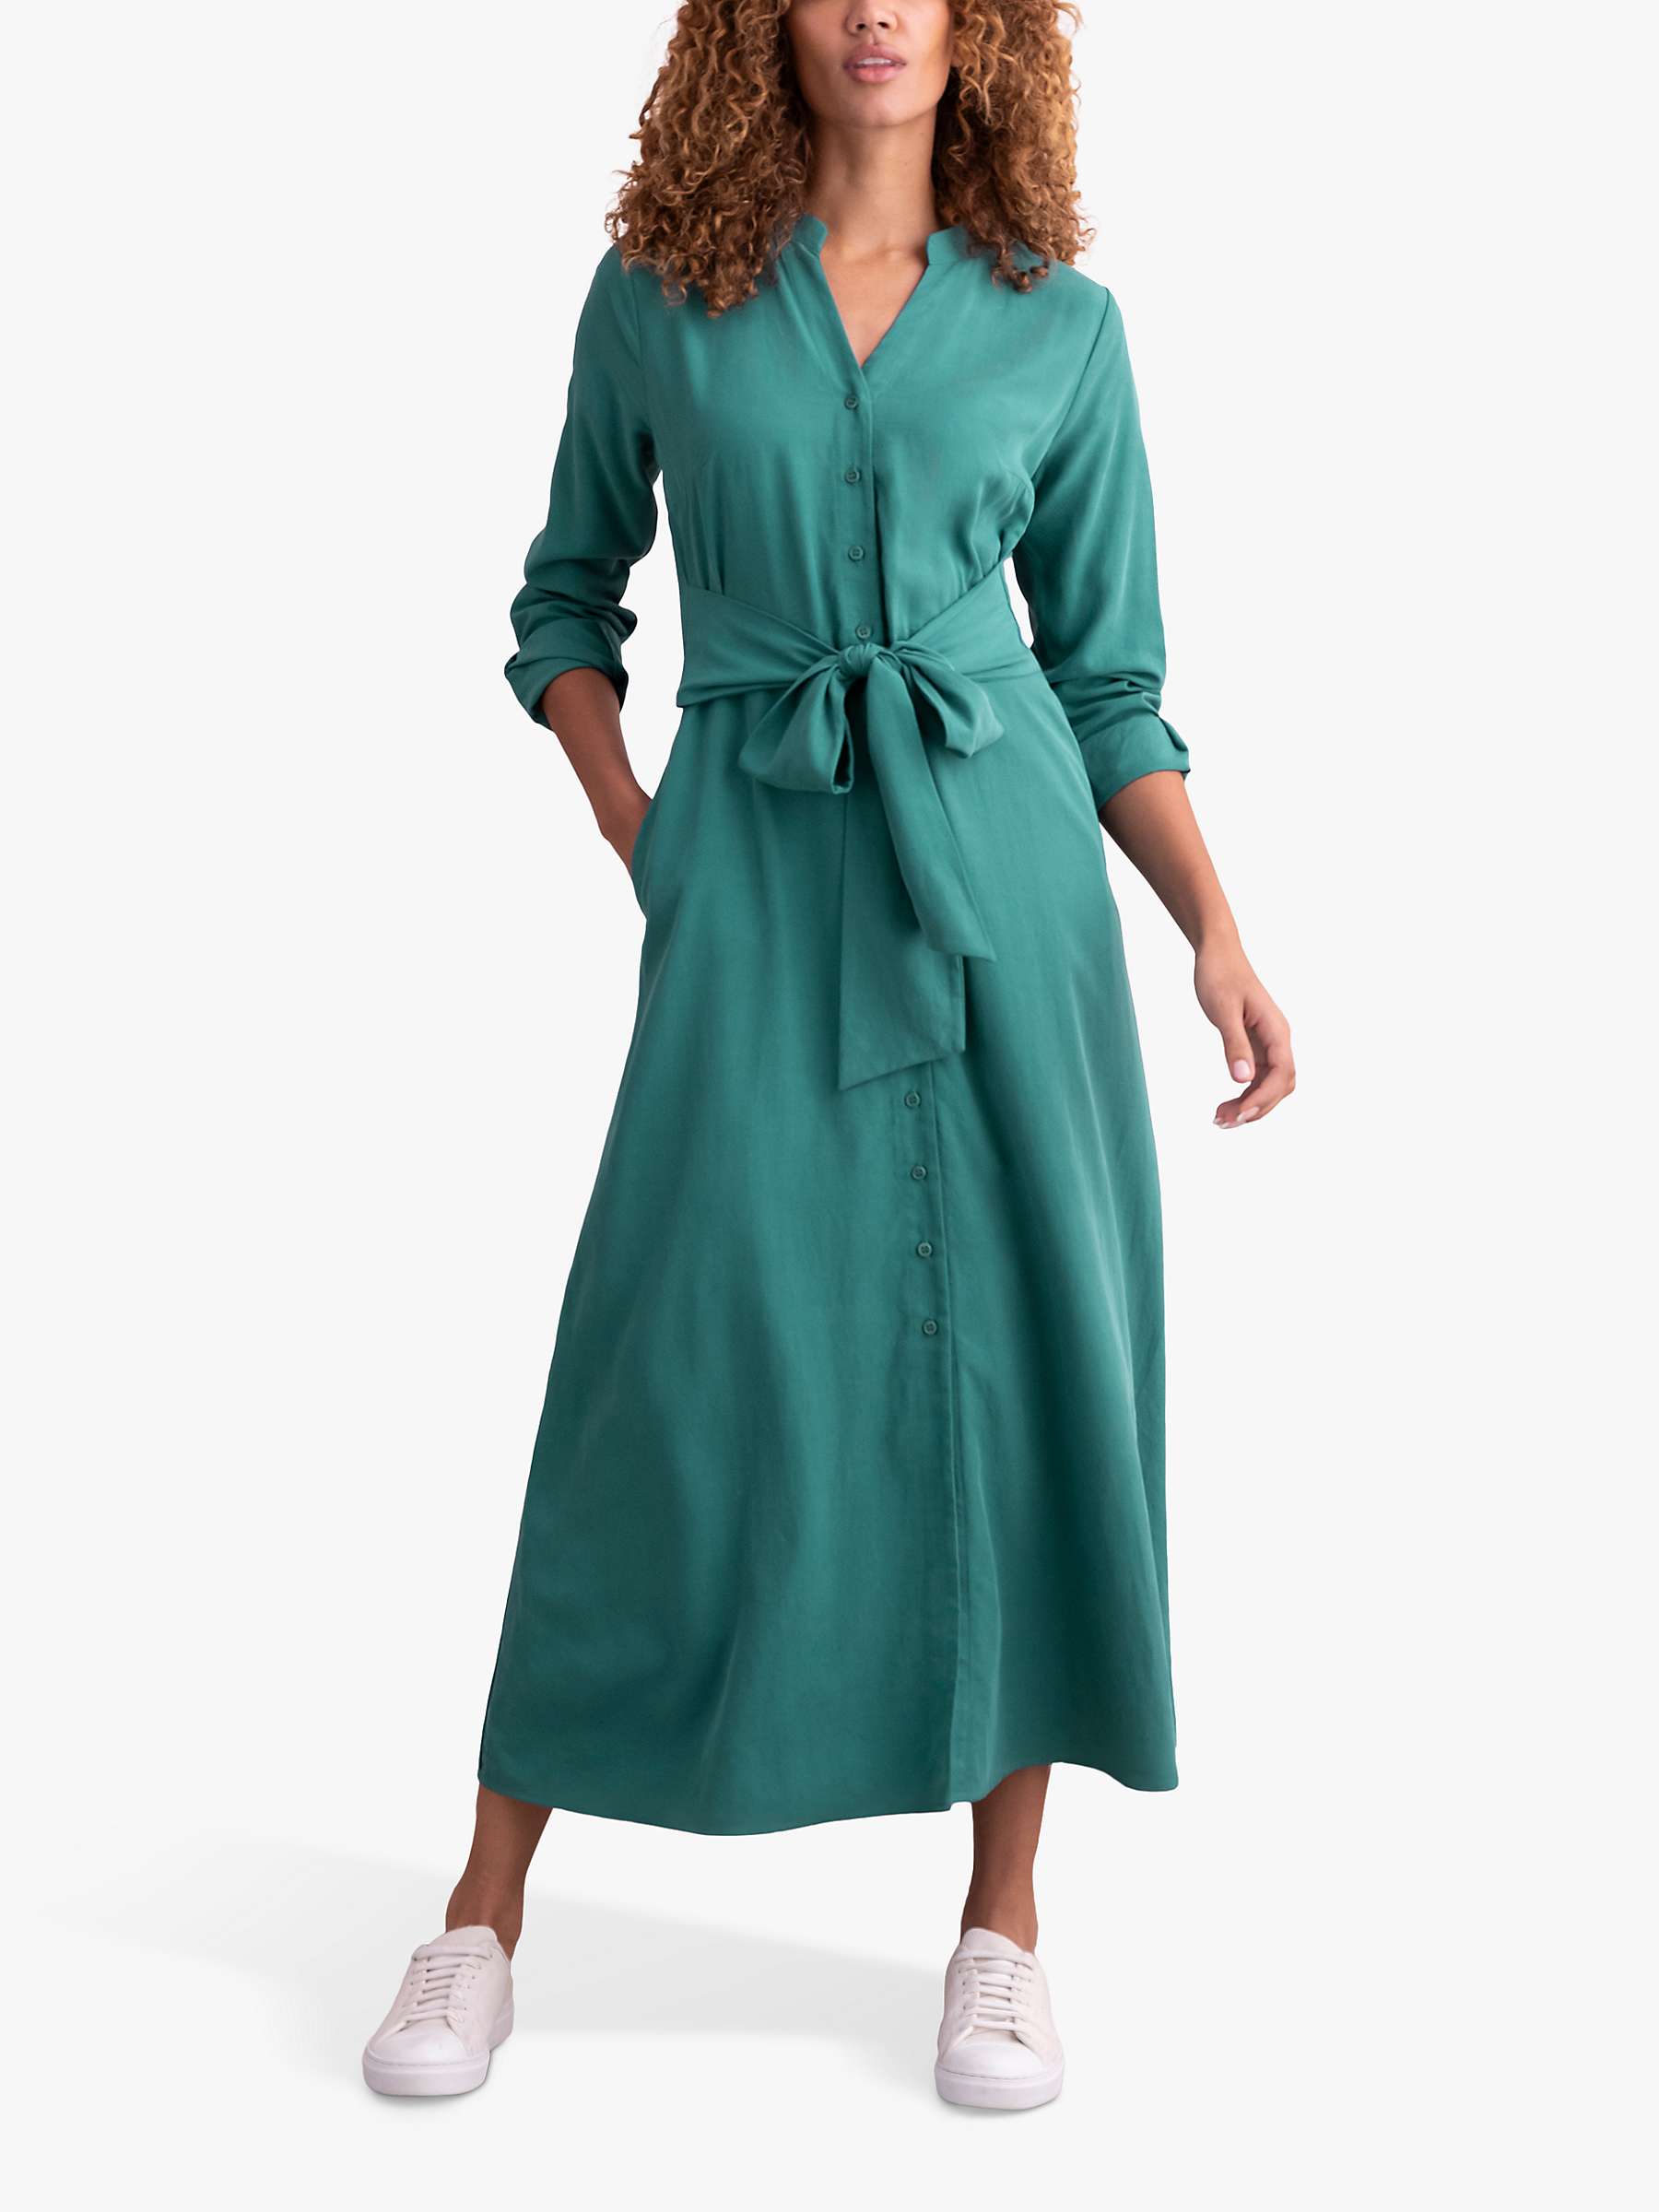 Buy Celtic & Co. Tie Lyocell Front Midi Dress, Sea Green Online at johnlewis.com